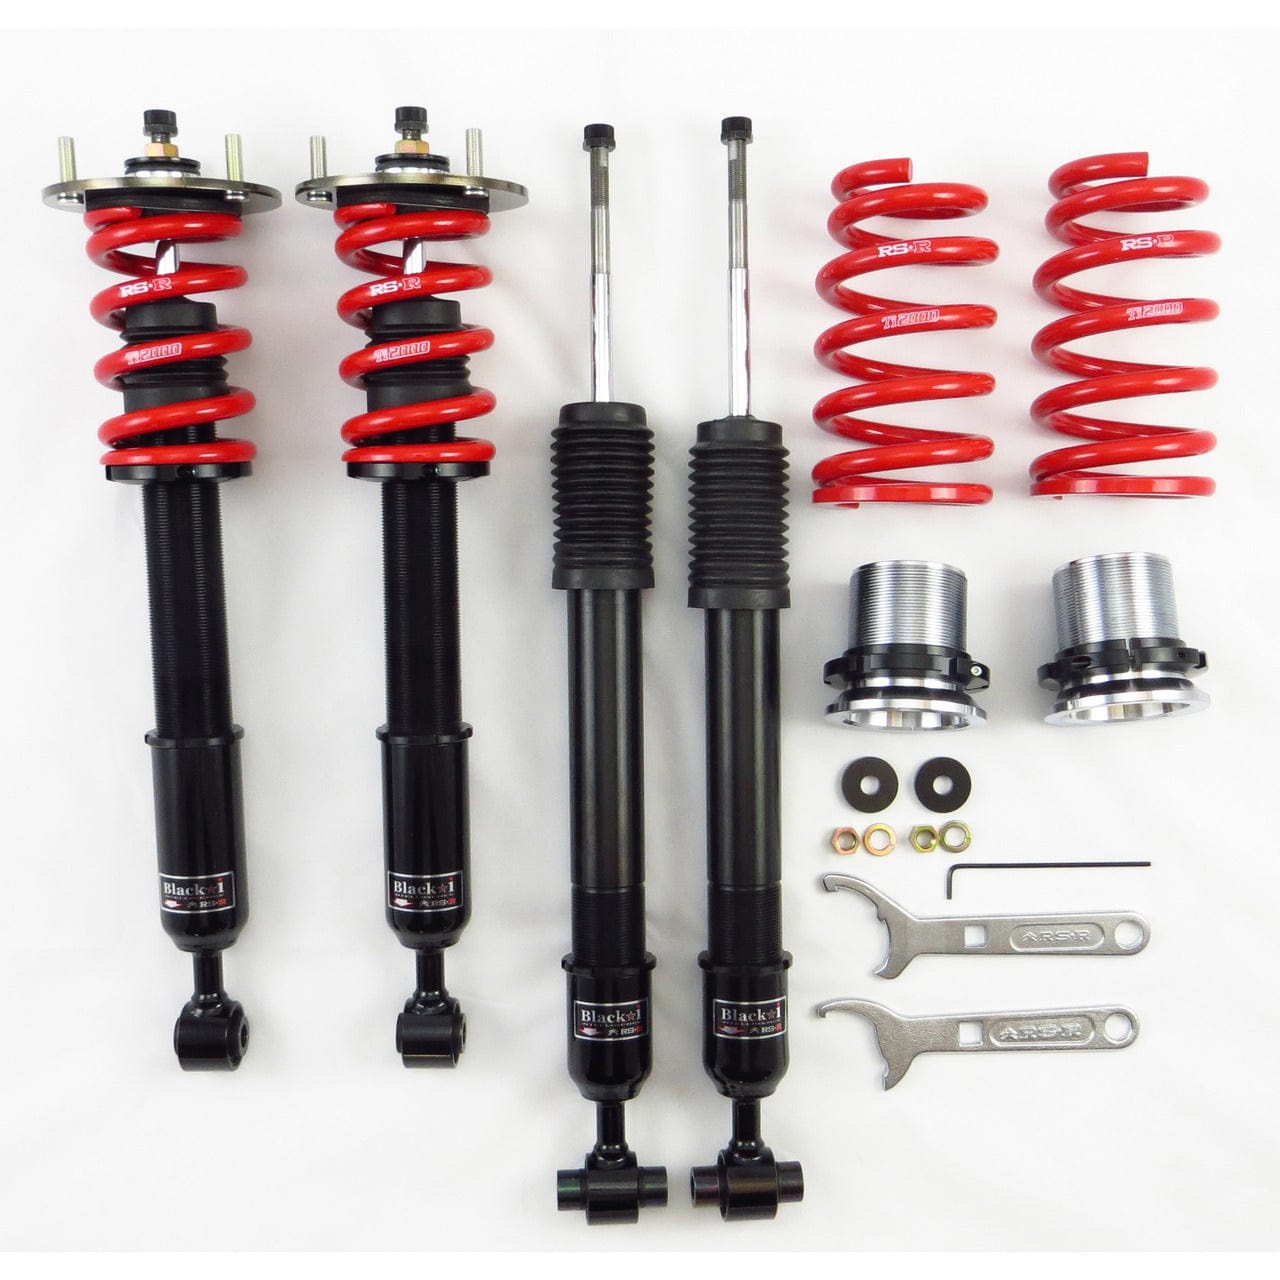 RS-R Black-i Coilovers - 2014+ Lexus IS250/IS350 RWD XBKT191M